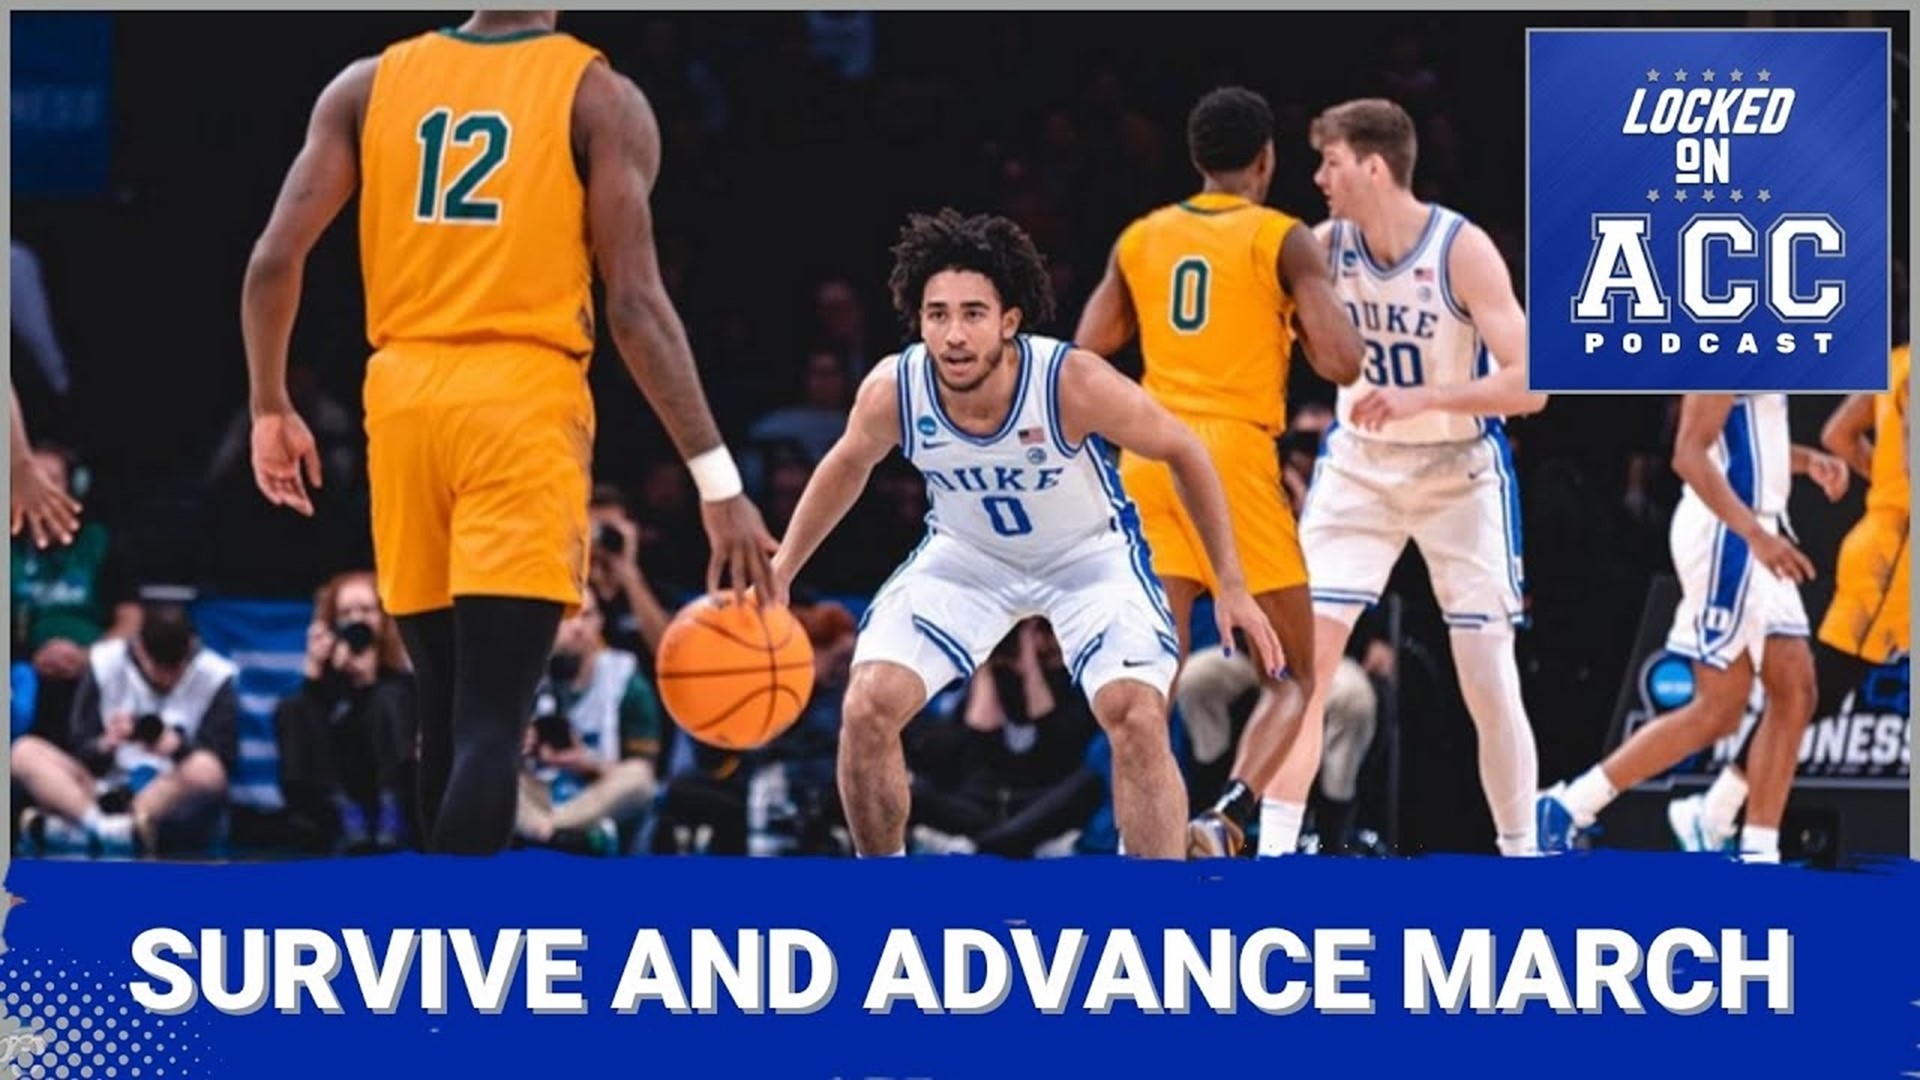 Survive & Advance ACC Picks Up 4 Wins in NCAA Tourney Opening Games